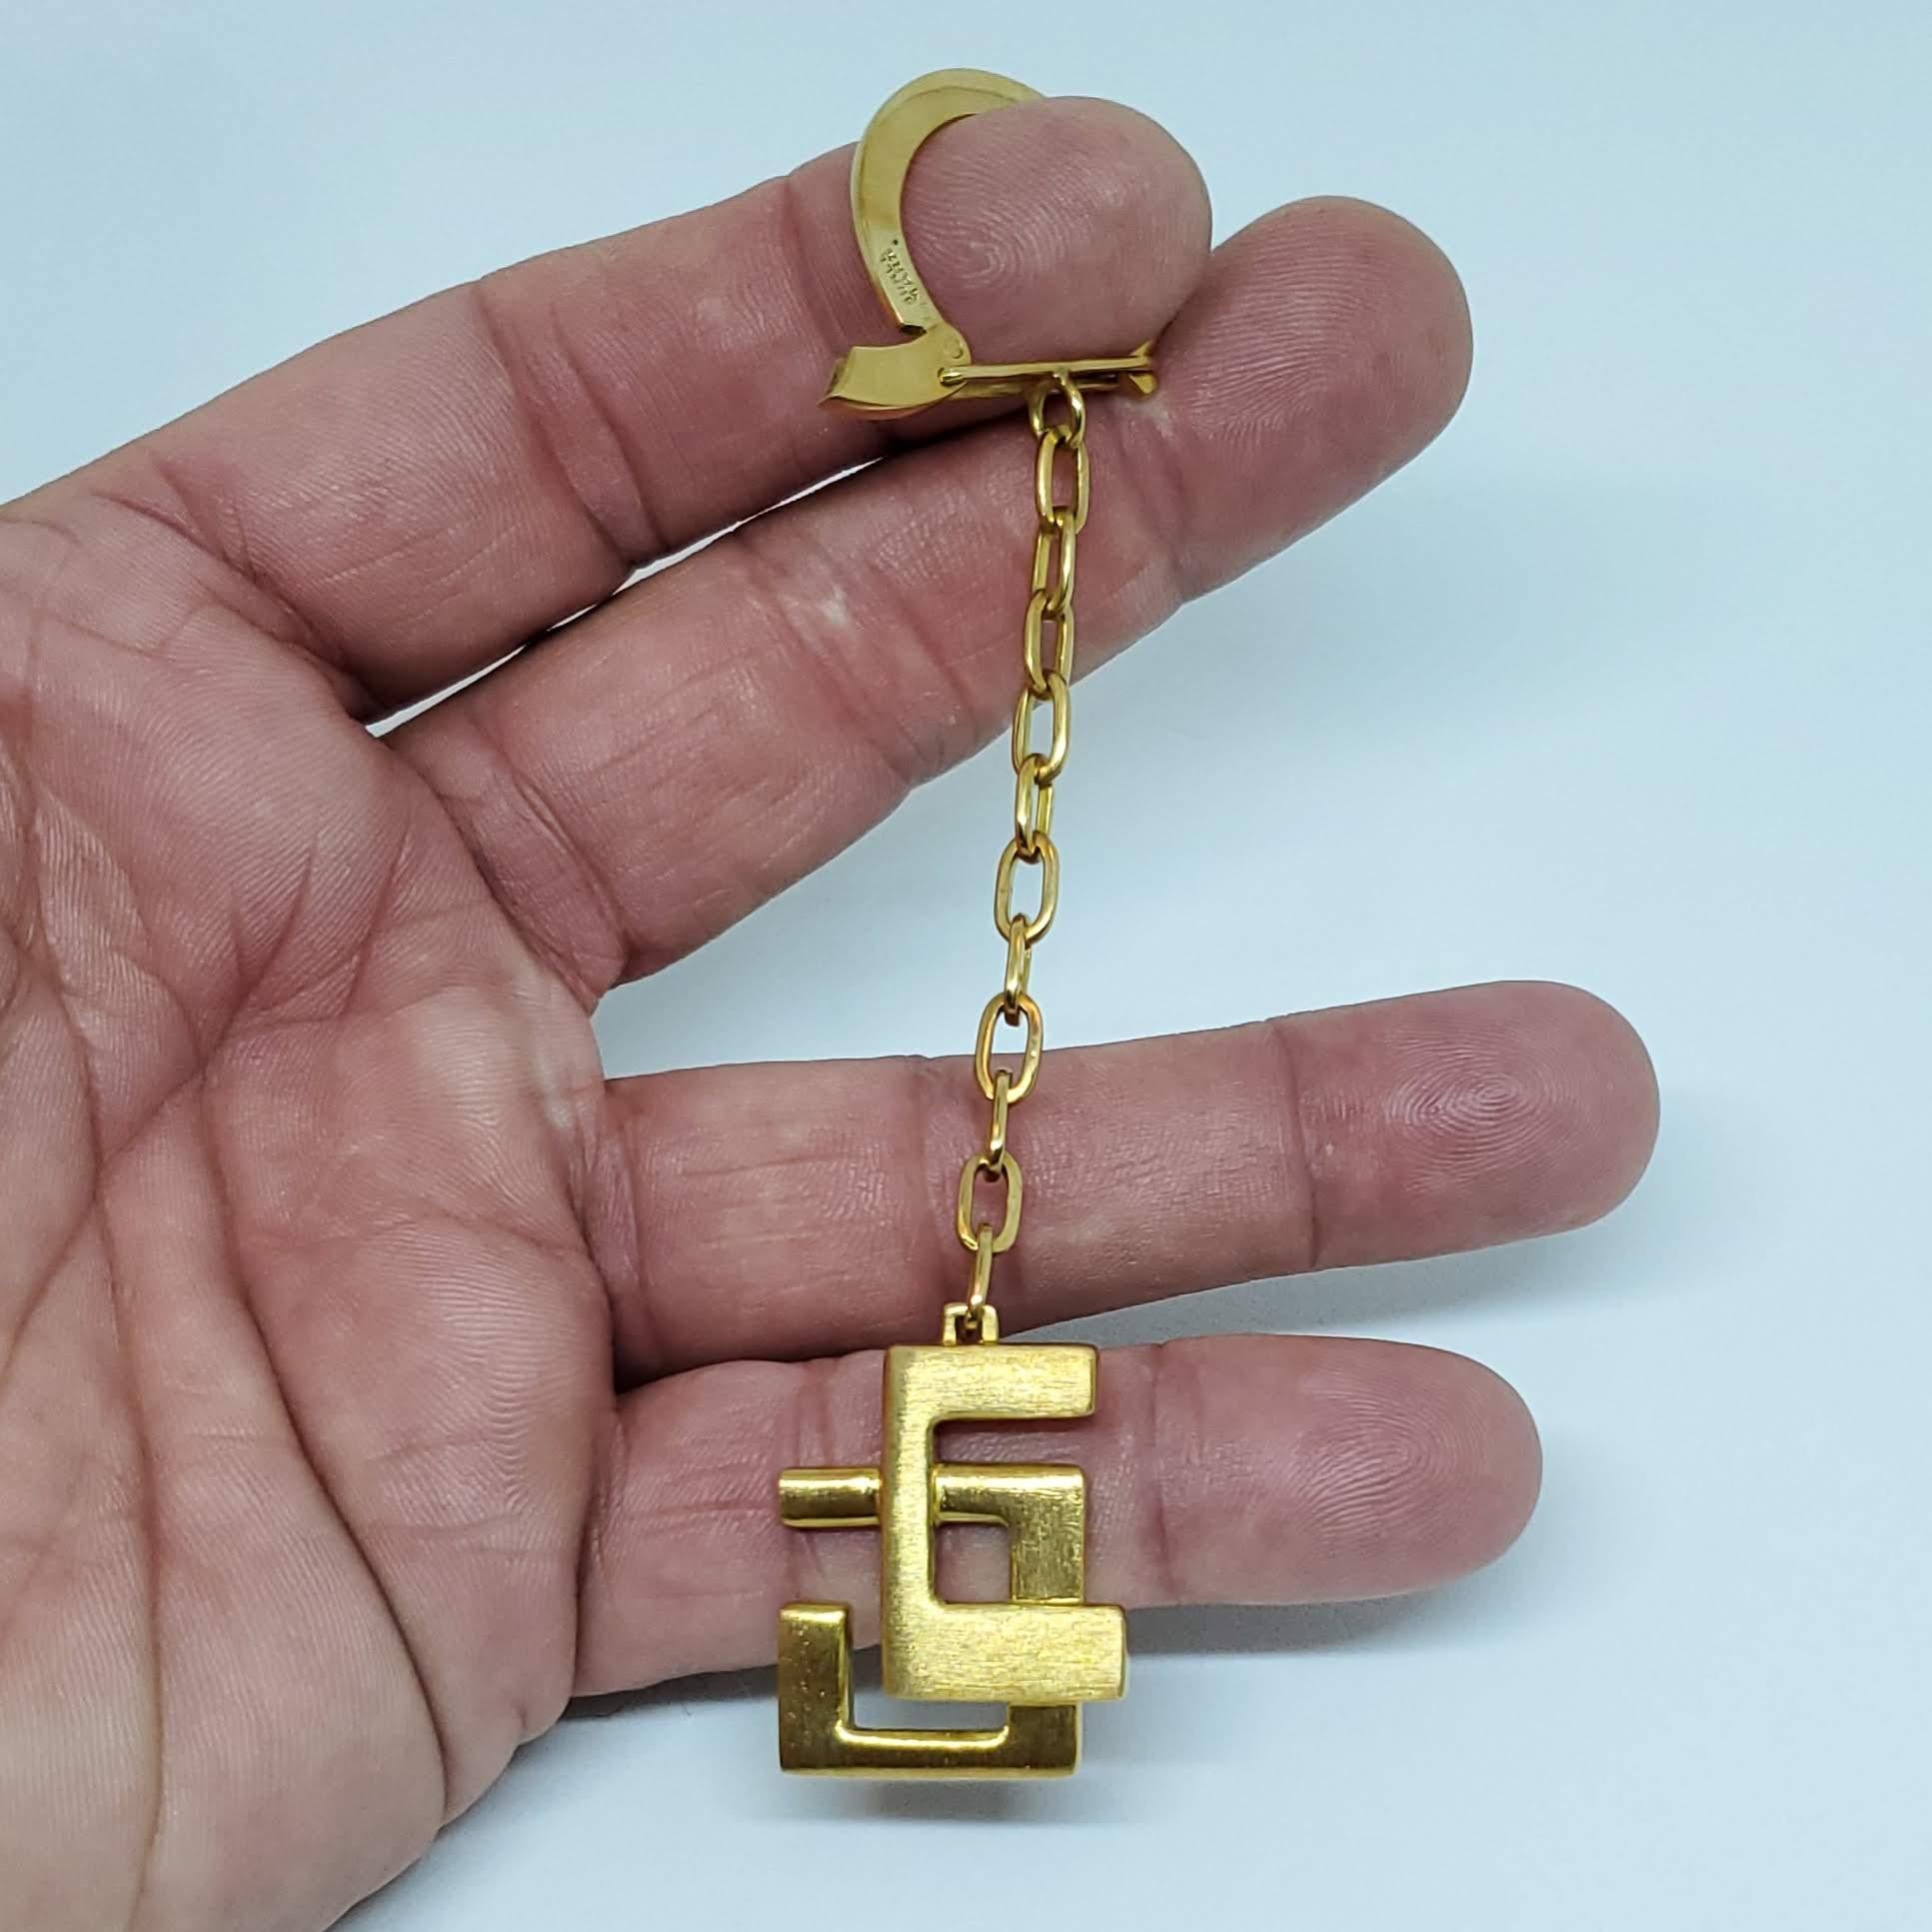 Burle Marx Rare 18 Karat Gold Keychain In Good Condition For Sale In Woodway, TX